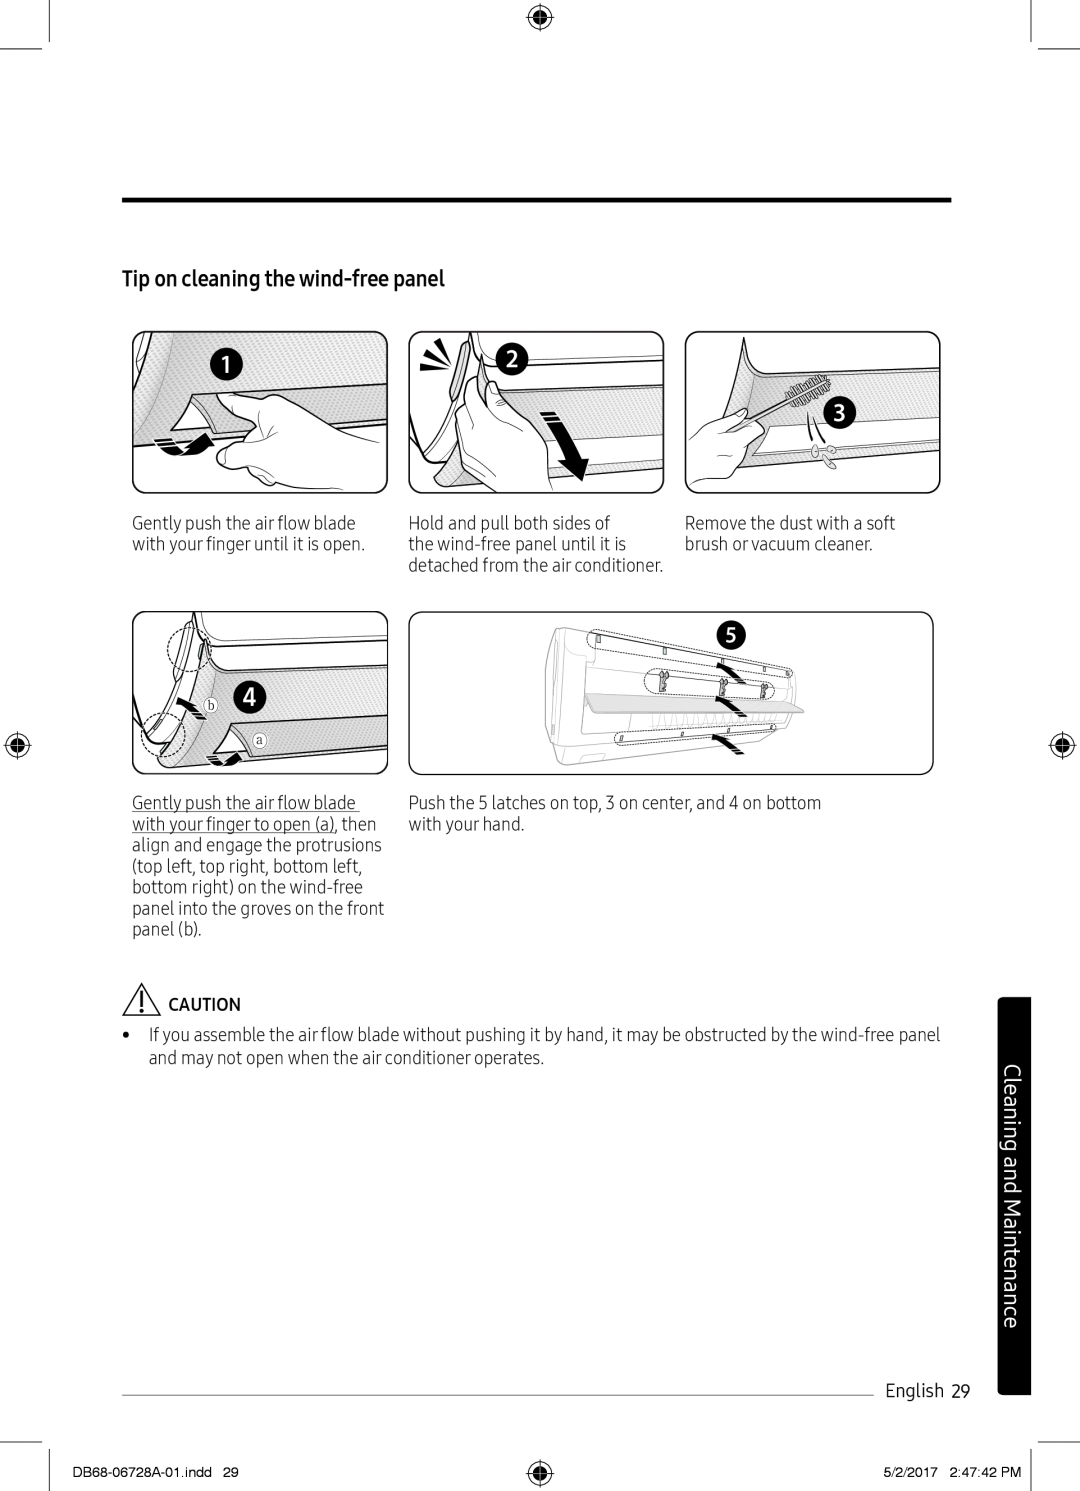 Samsung AR07MSPXAWKNEU manual Tip on cleaning the wind-free panel, Cleaning and Maintenance, brush or vacuum cleaner 